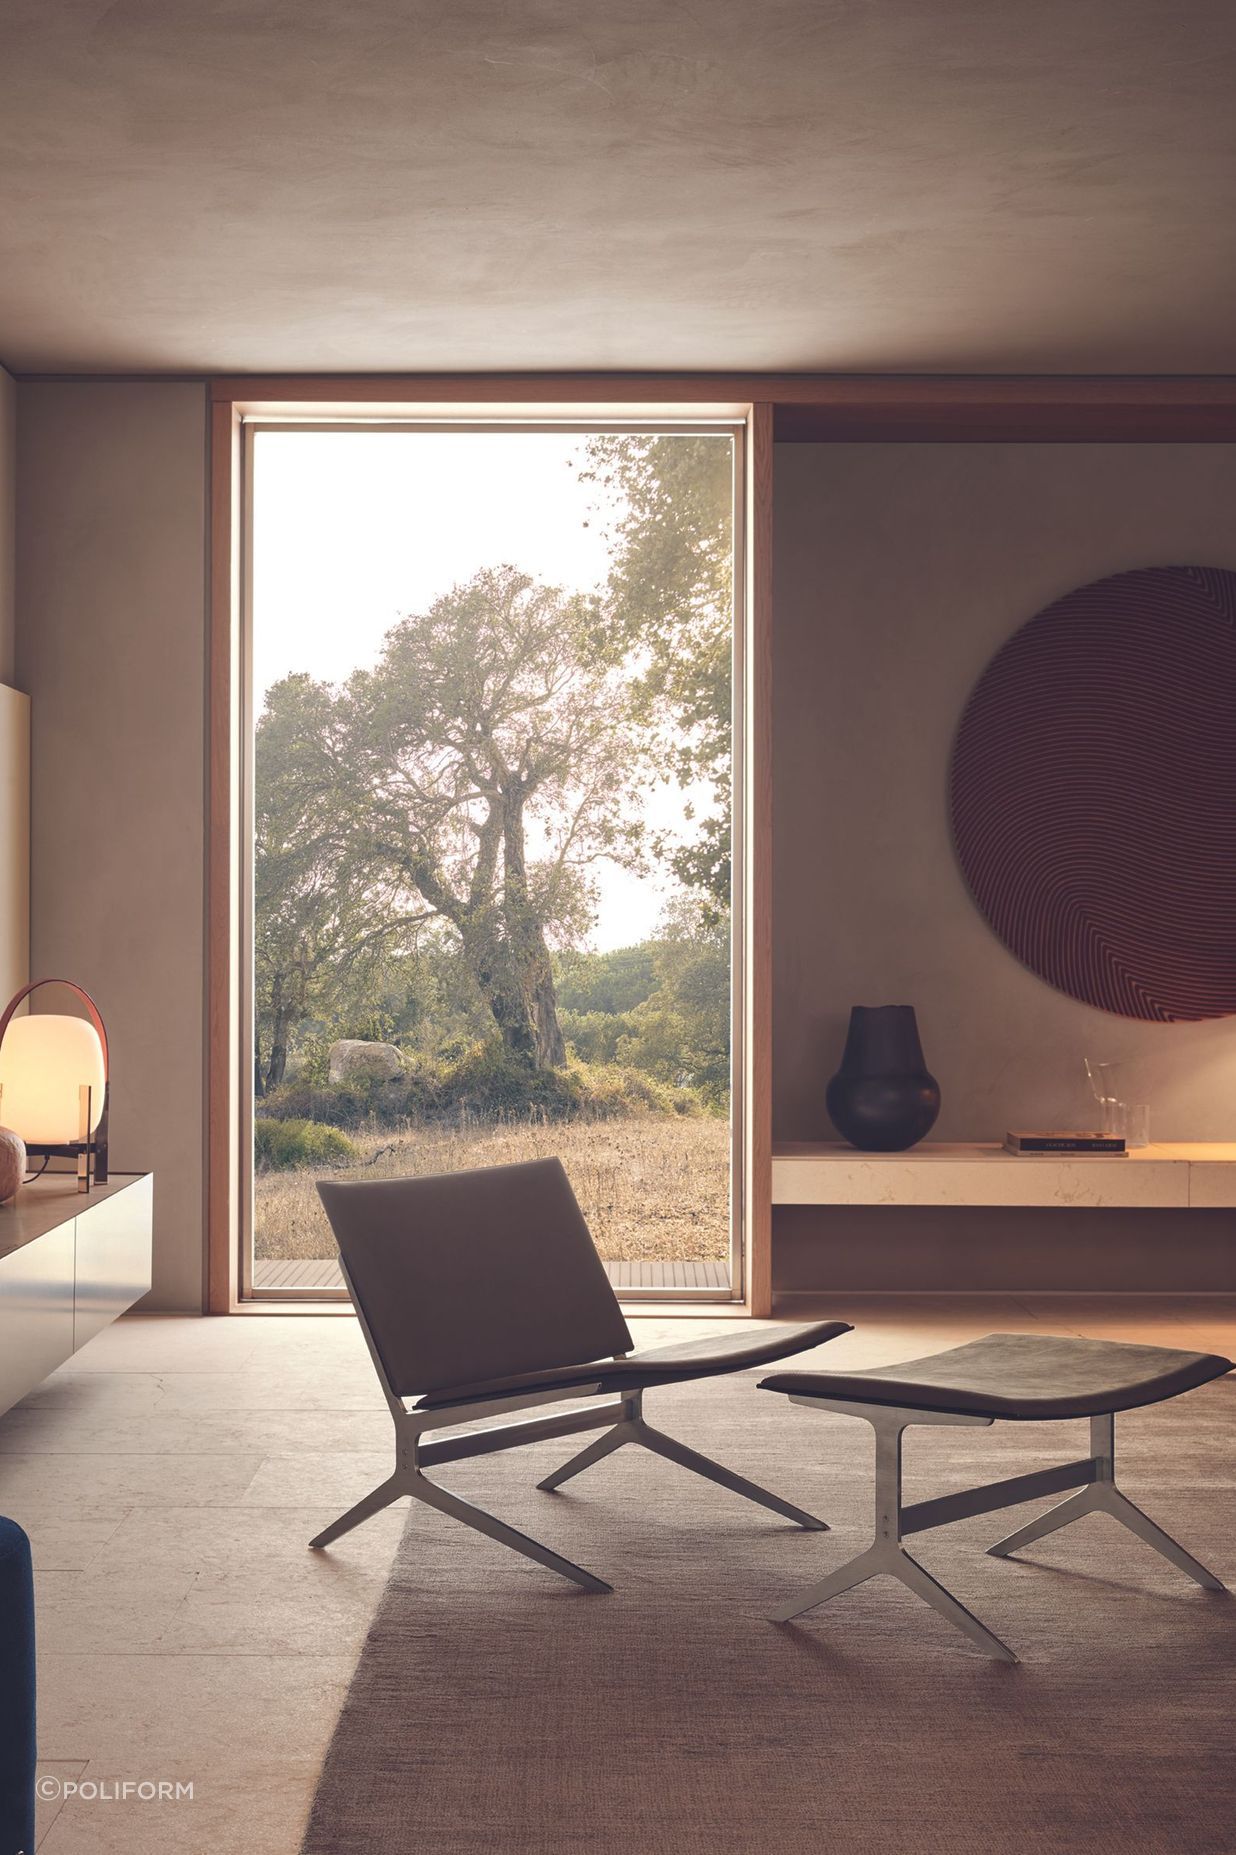 The Kay chair blends perfectly in minimalist interiors